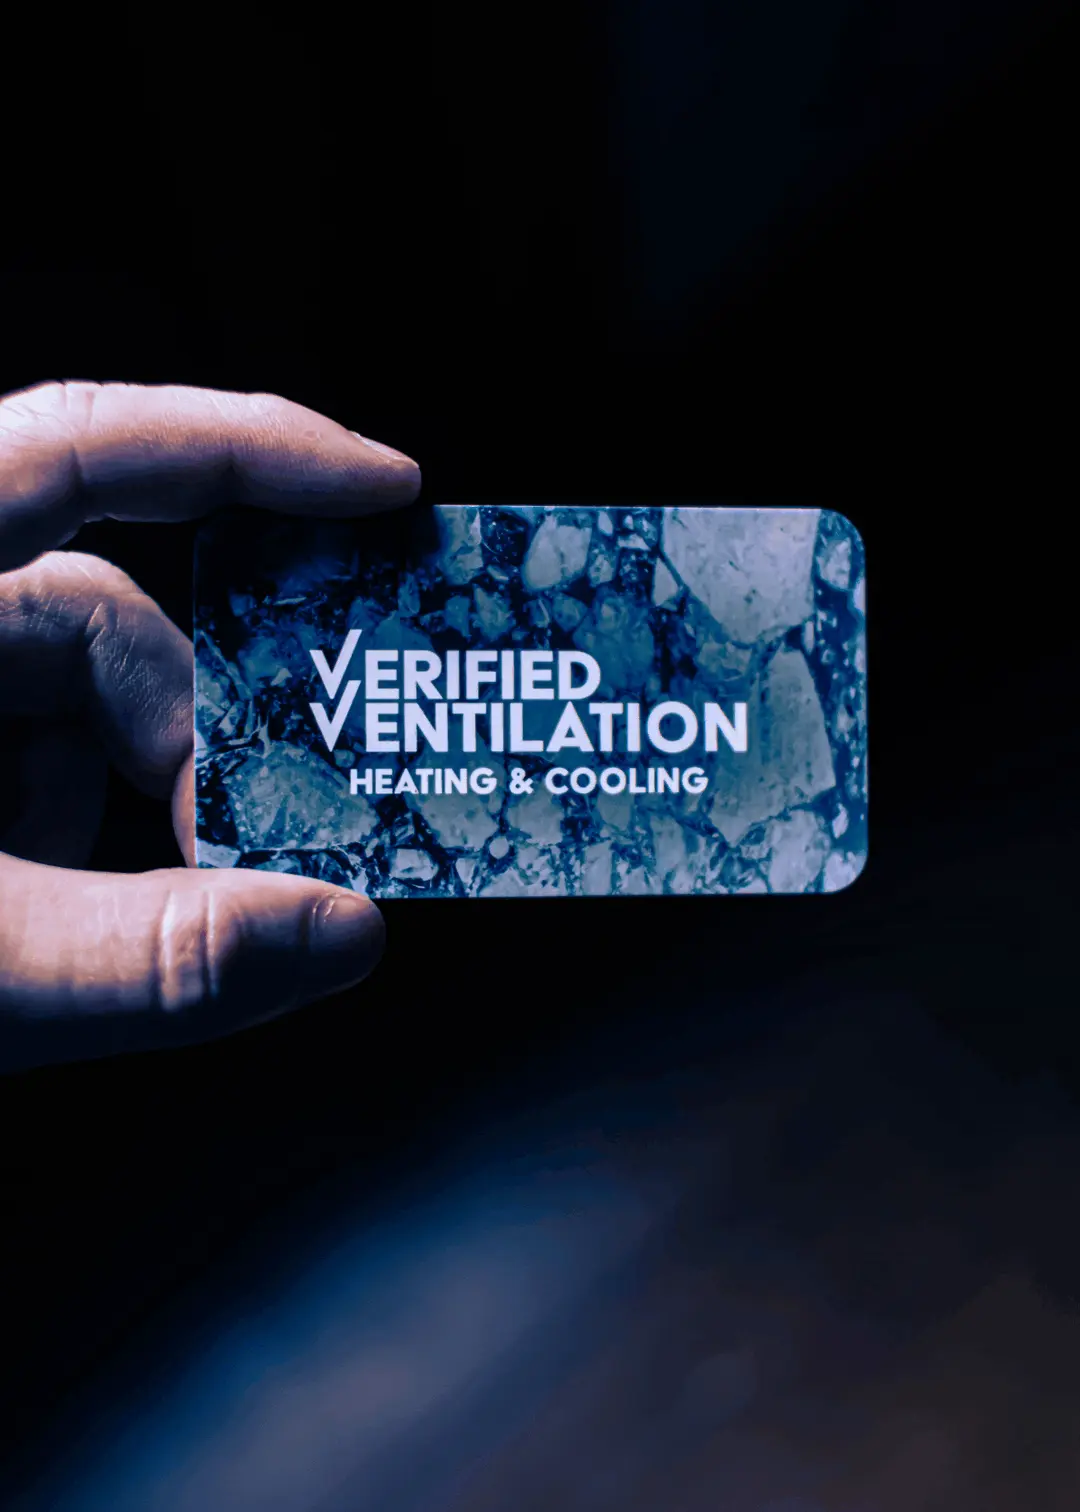 an animated image showing the Verified Ventilation business card transitioning from the front side of the card to the back side of the card. Details have been blurred for employee privacy.